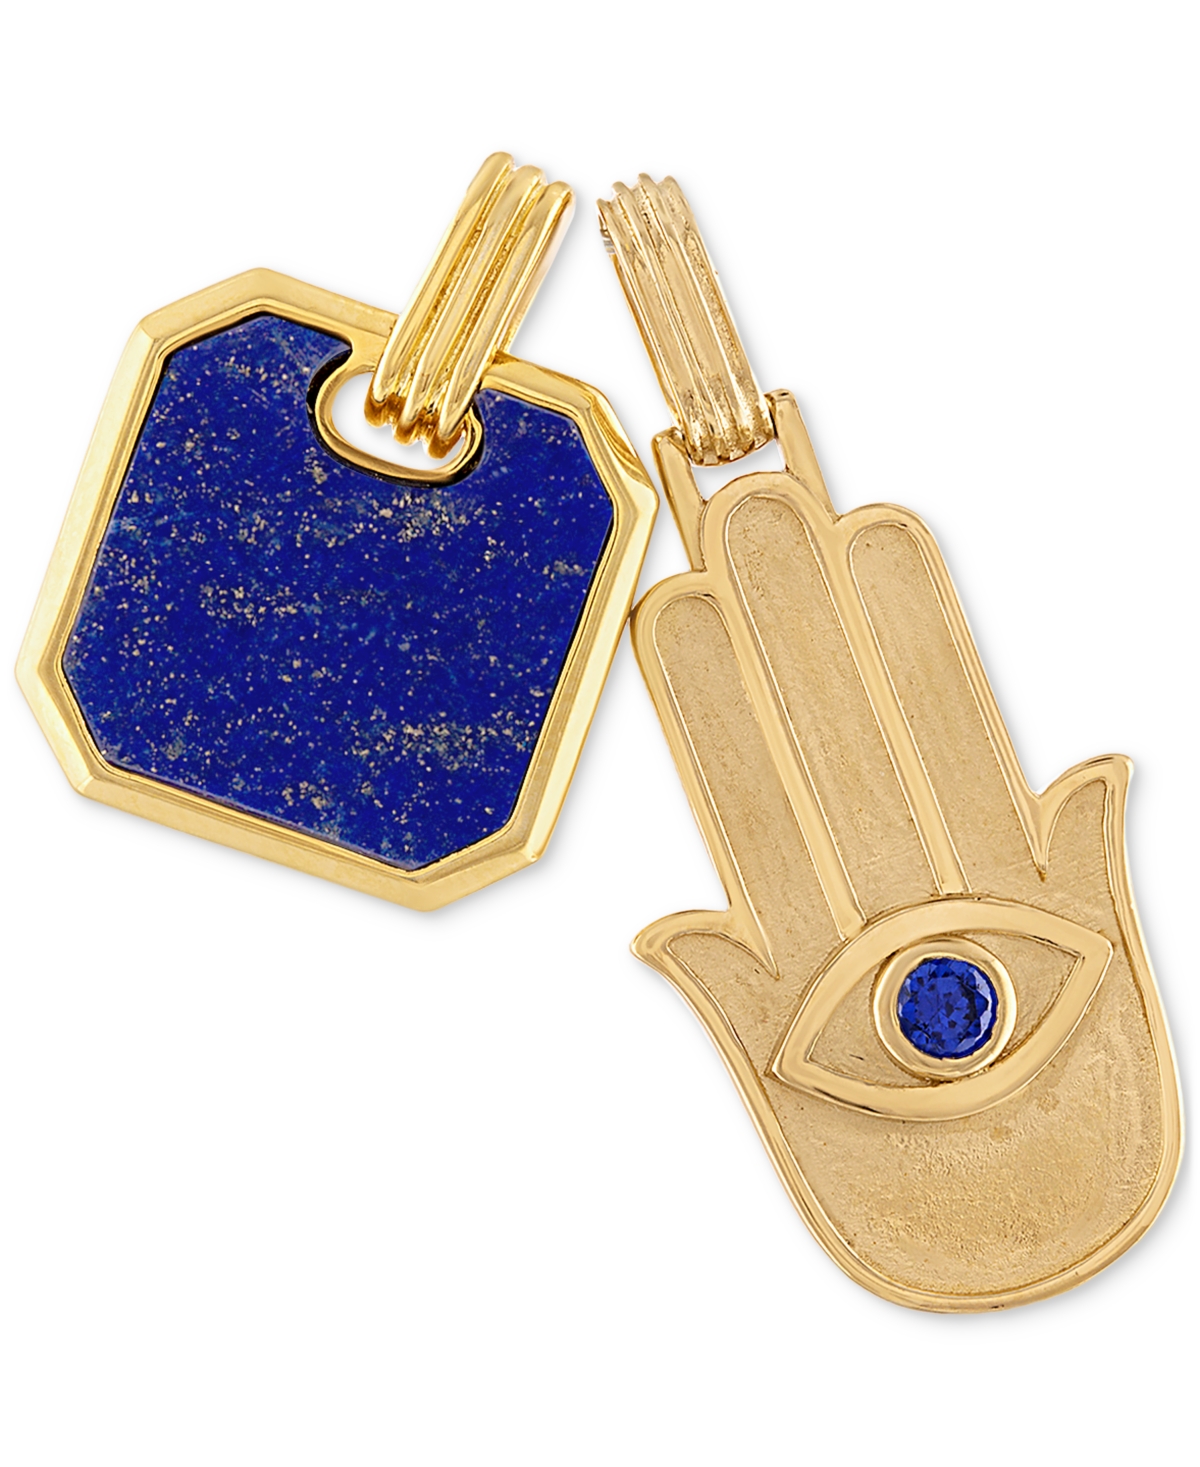 2-Pc. Set Lapis Lazuli & Cubic Zirconia Dog Tag & Hamsa Hand Amulet Pendants in 14k Gold-Plated Sterling Silver, Created for Mac